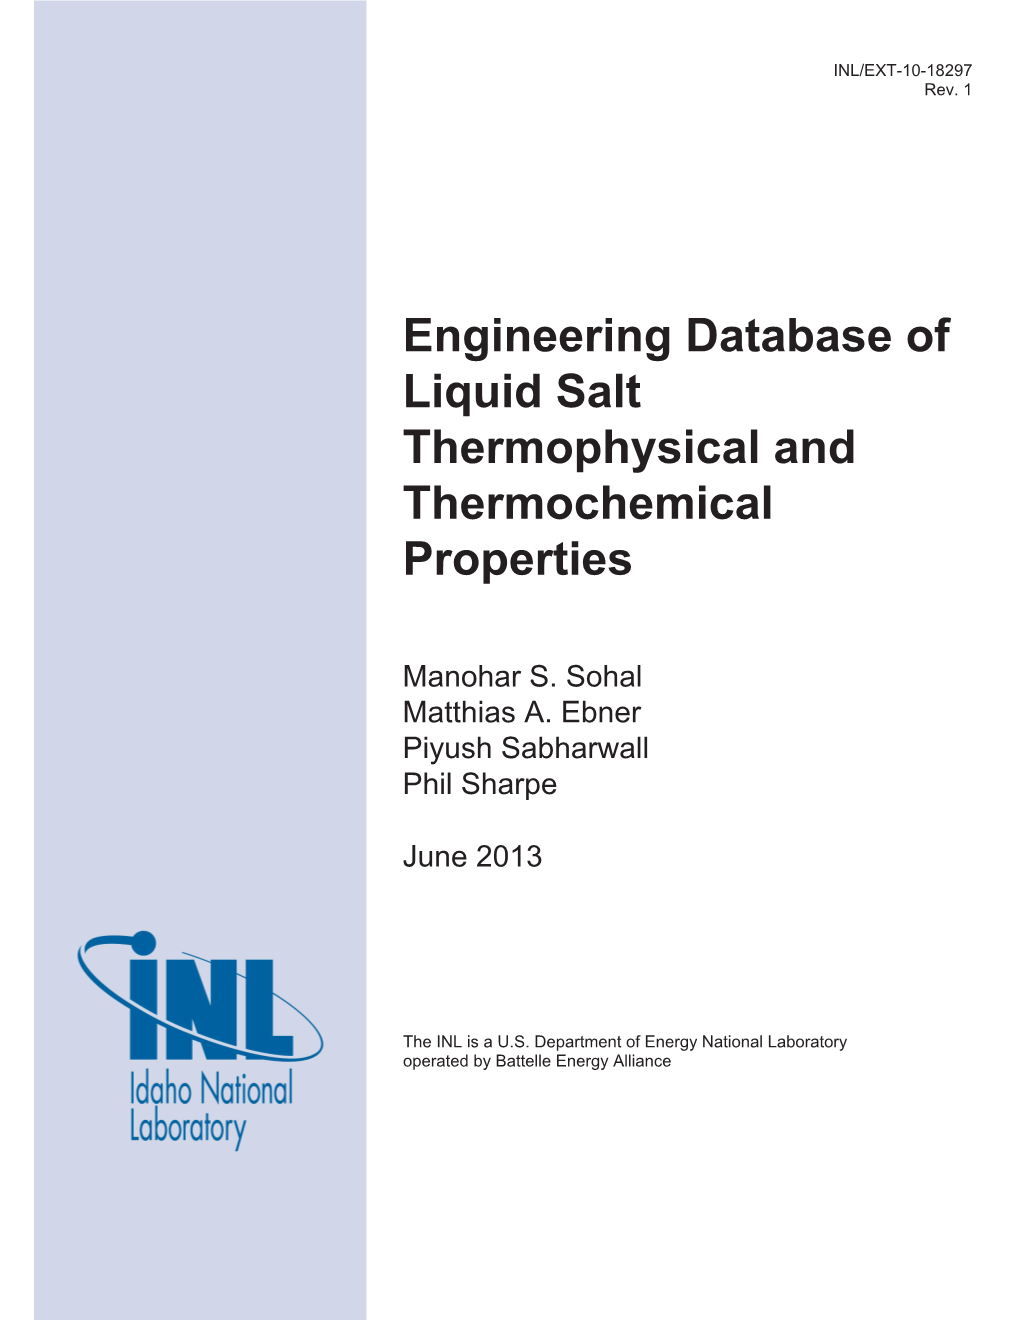 Engineering Database of Liquid Salt Thermophysical and Thermochemical Properties